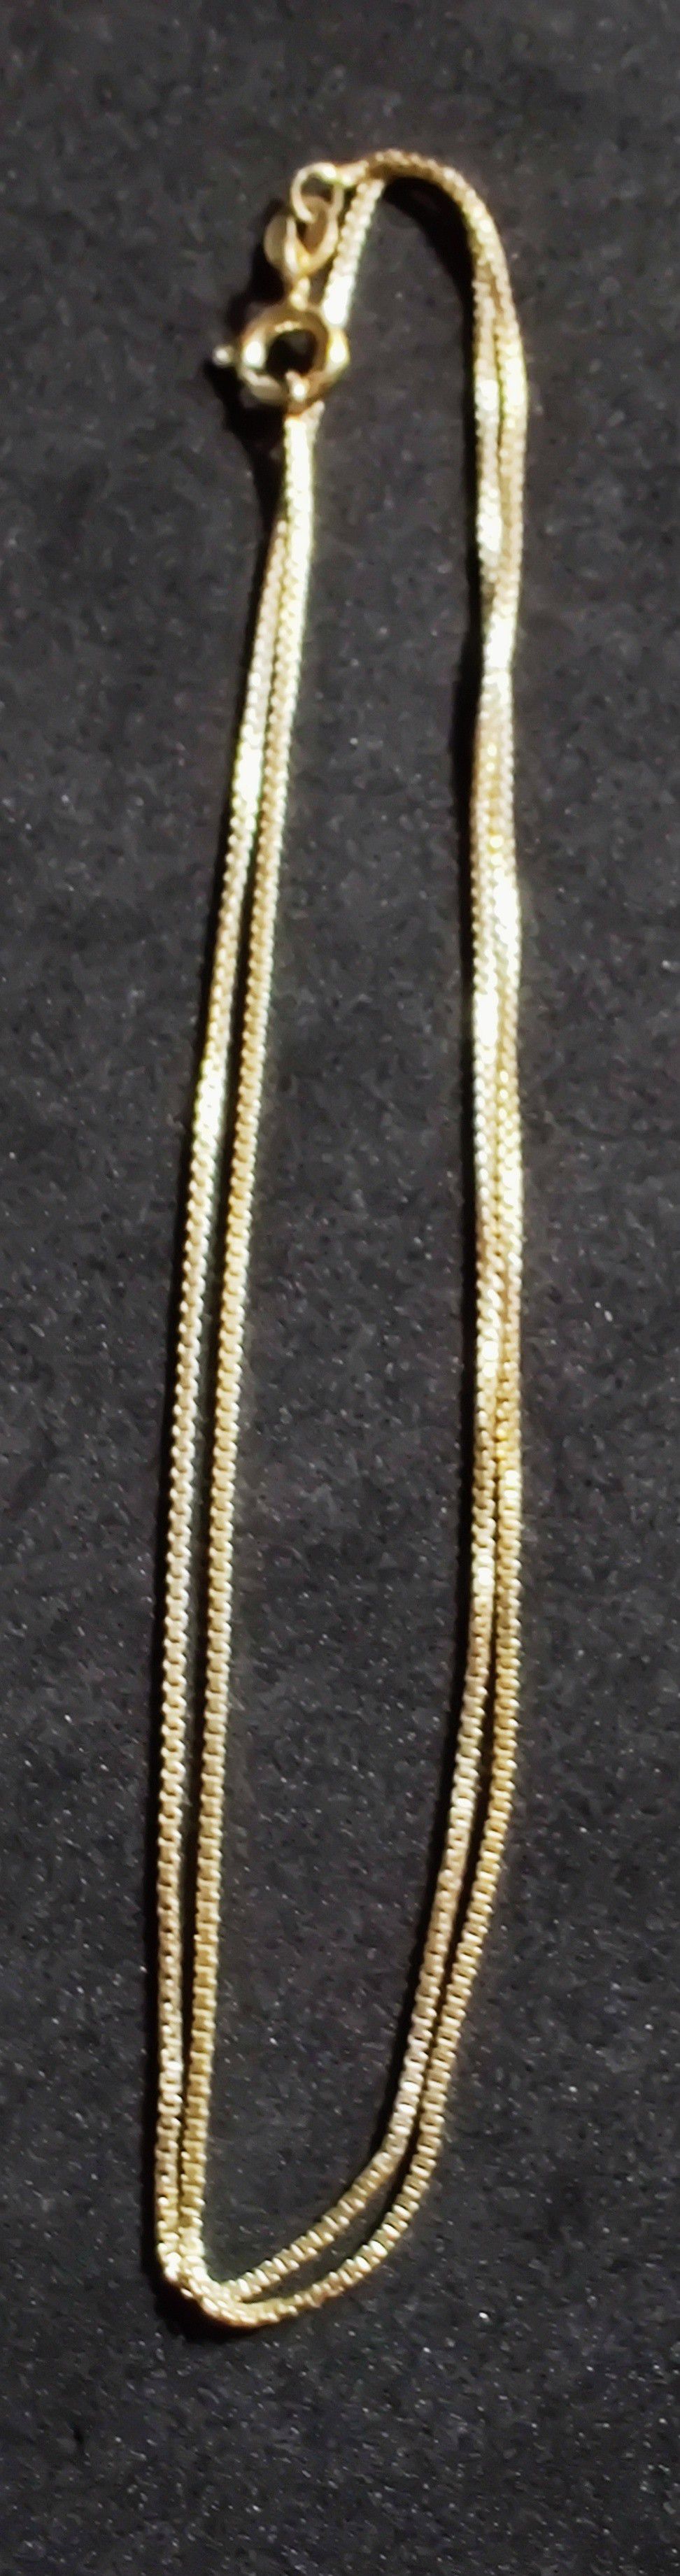 Gold plated sterling silver box chain Necklace 18" stamped PC 925